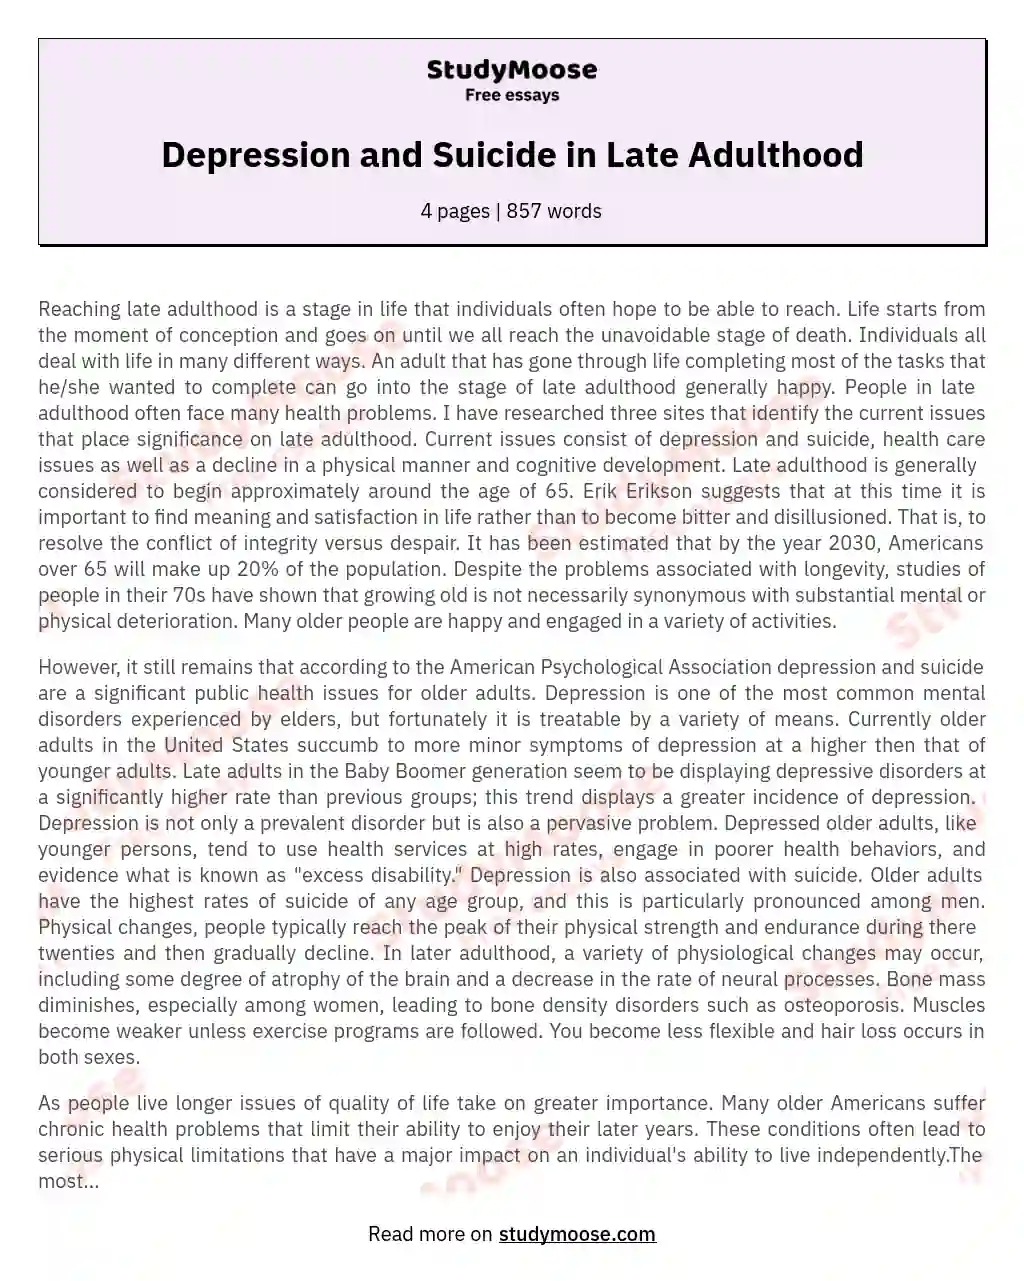 Depression and Suicide in Late Adulthood